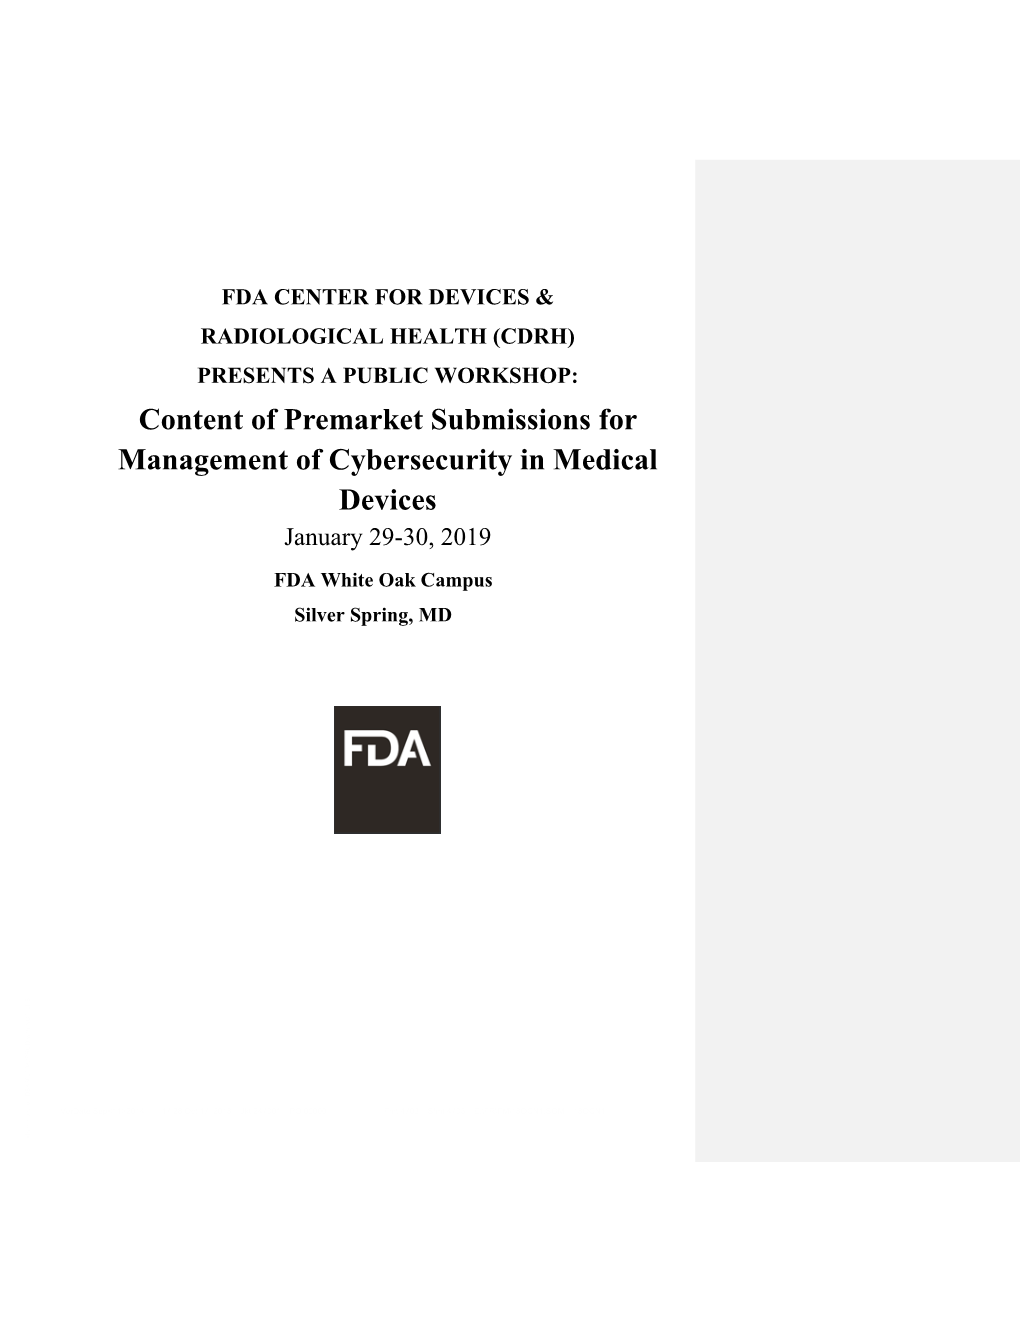 Content of Premarket Submissions for Management of Cybersecurity in Medical Devices January 29-30, 2019 FDA White Oak Campus Silver Spring, MD